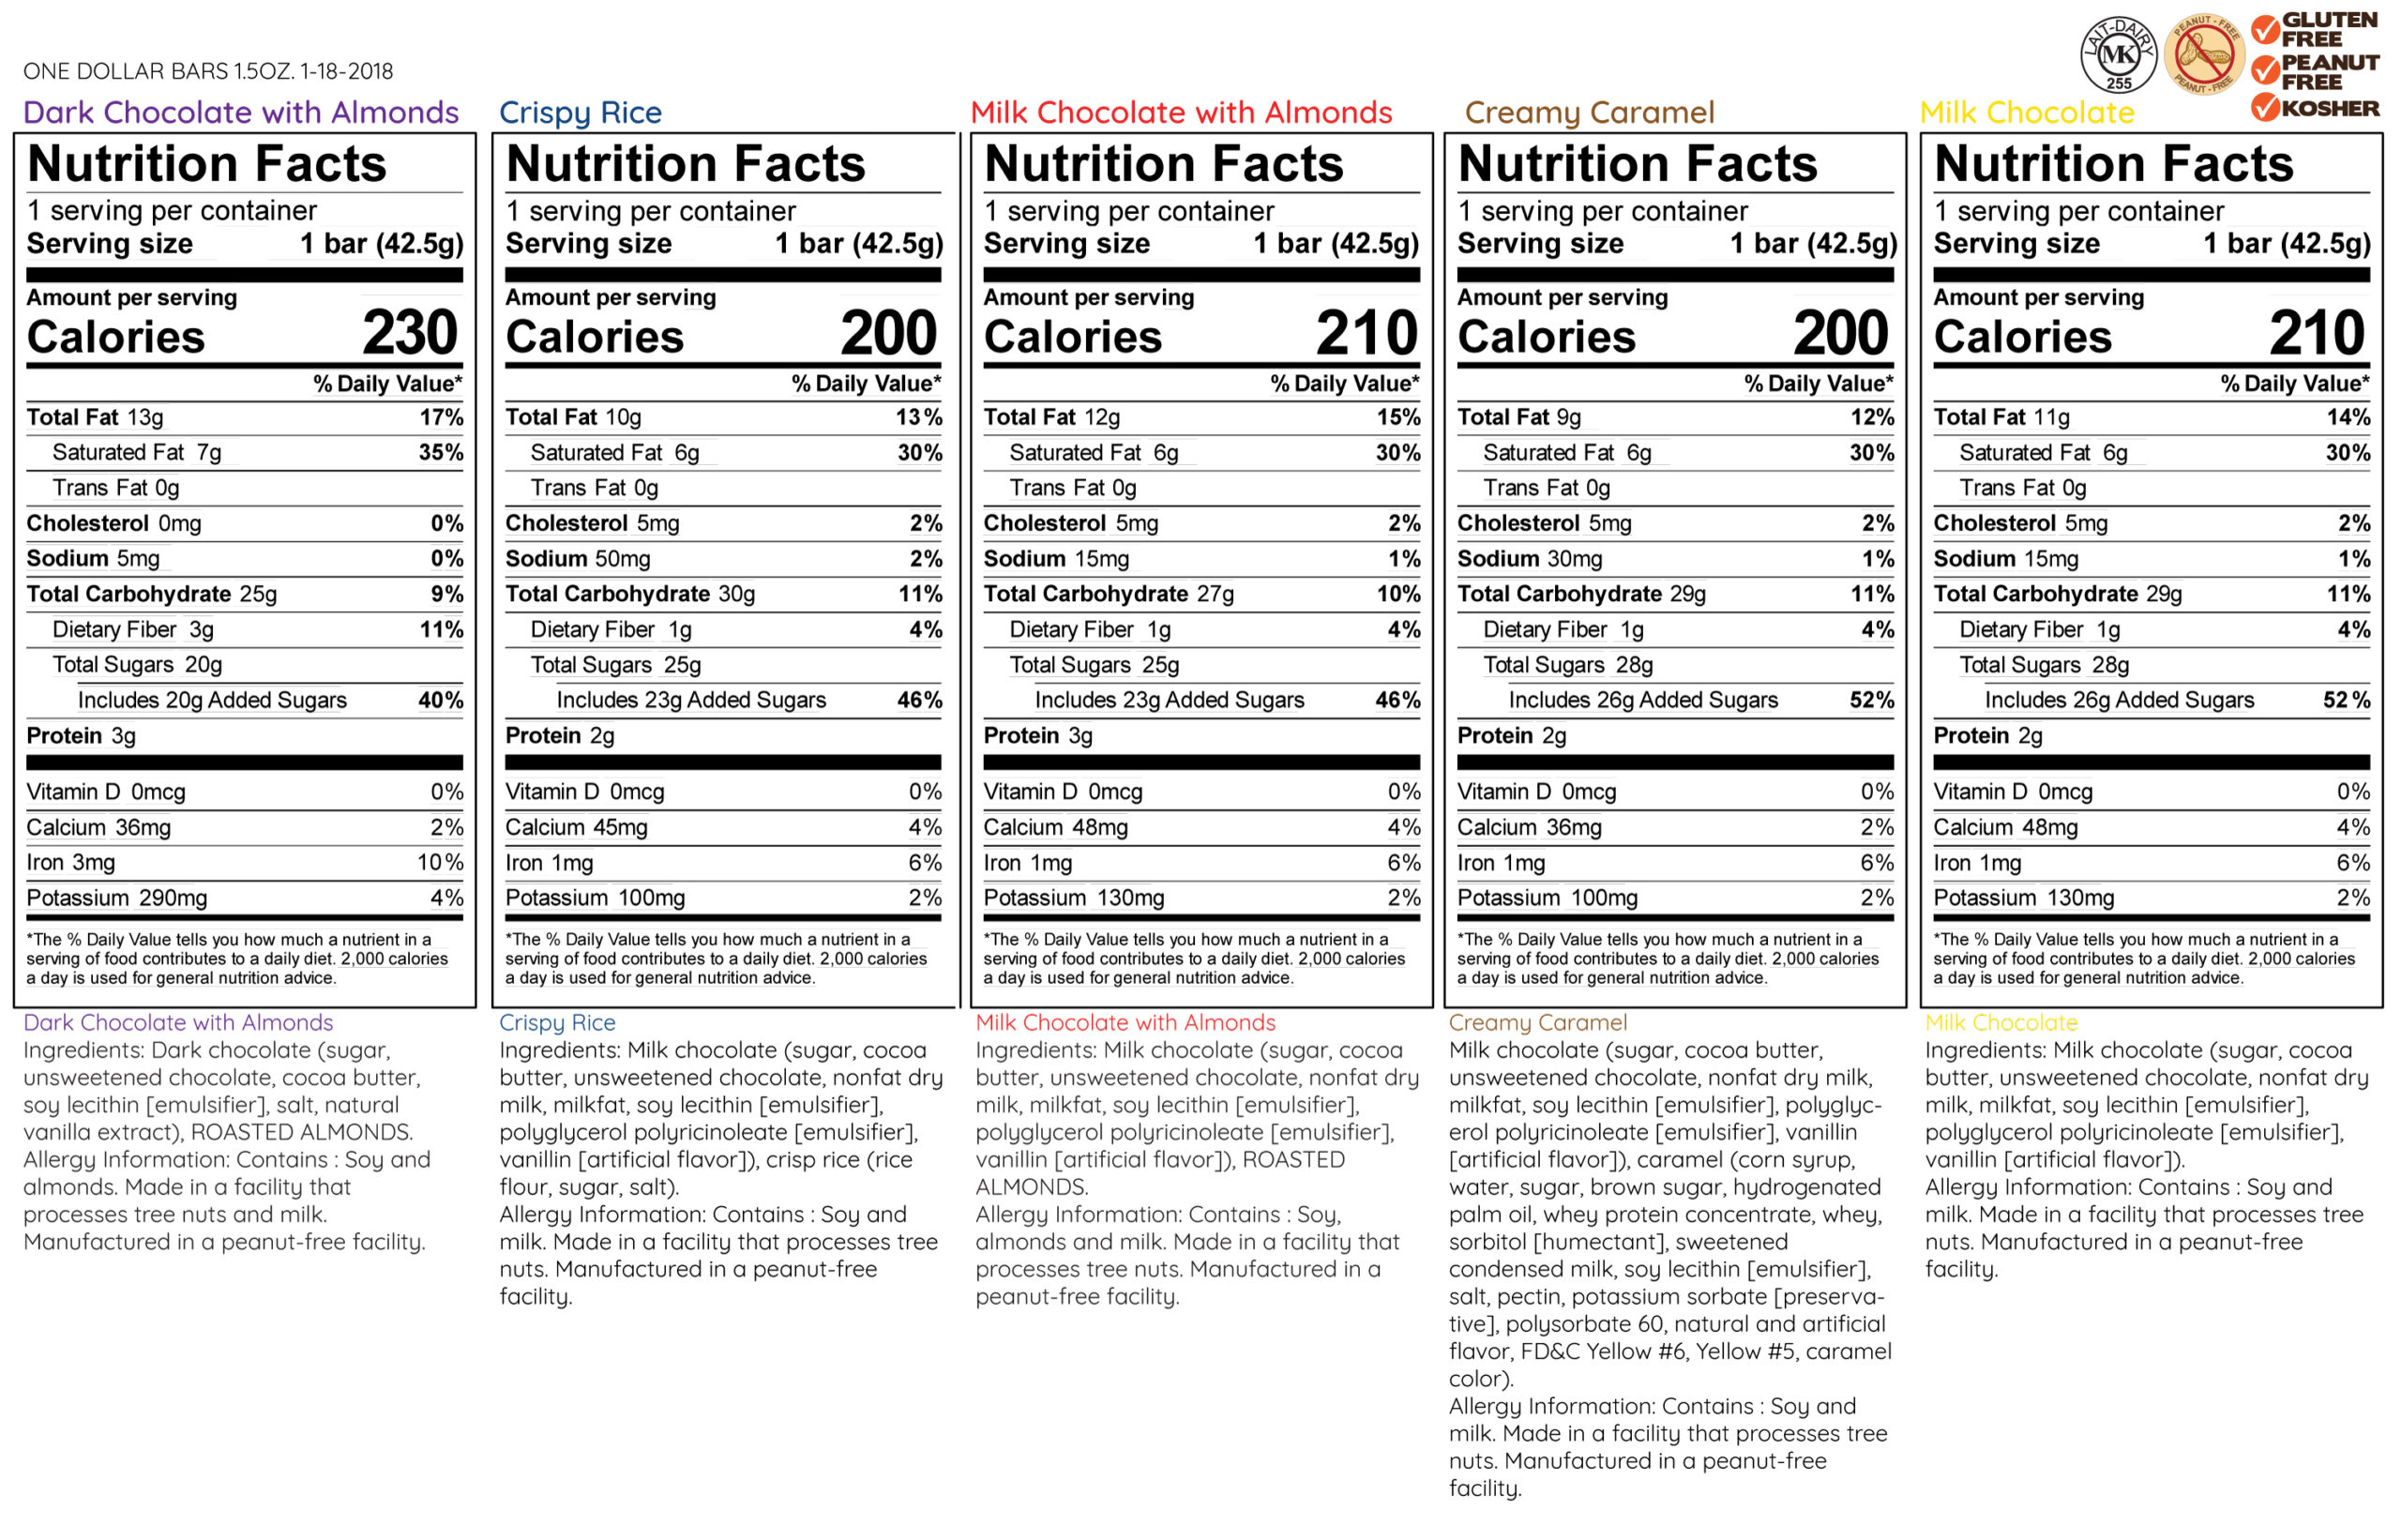 ONE-DOLLAR-BARS-1.5oz-Ingredients-and-Nutrition-Facts